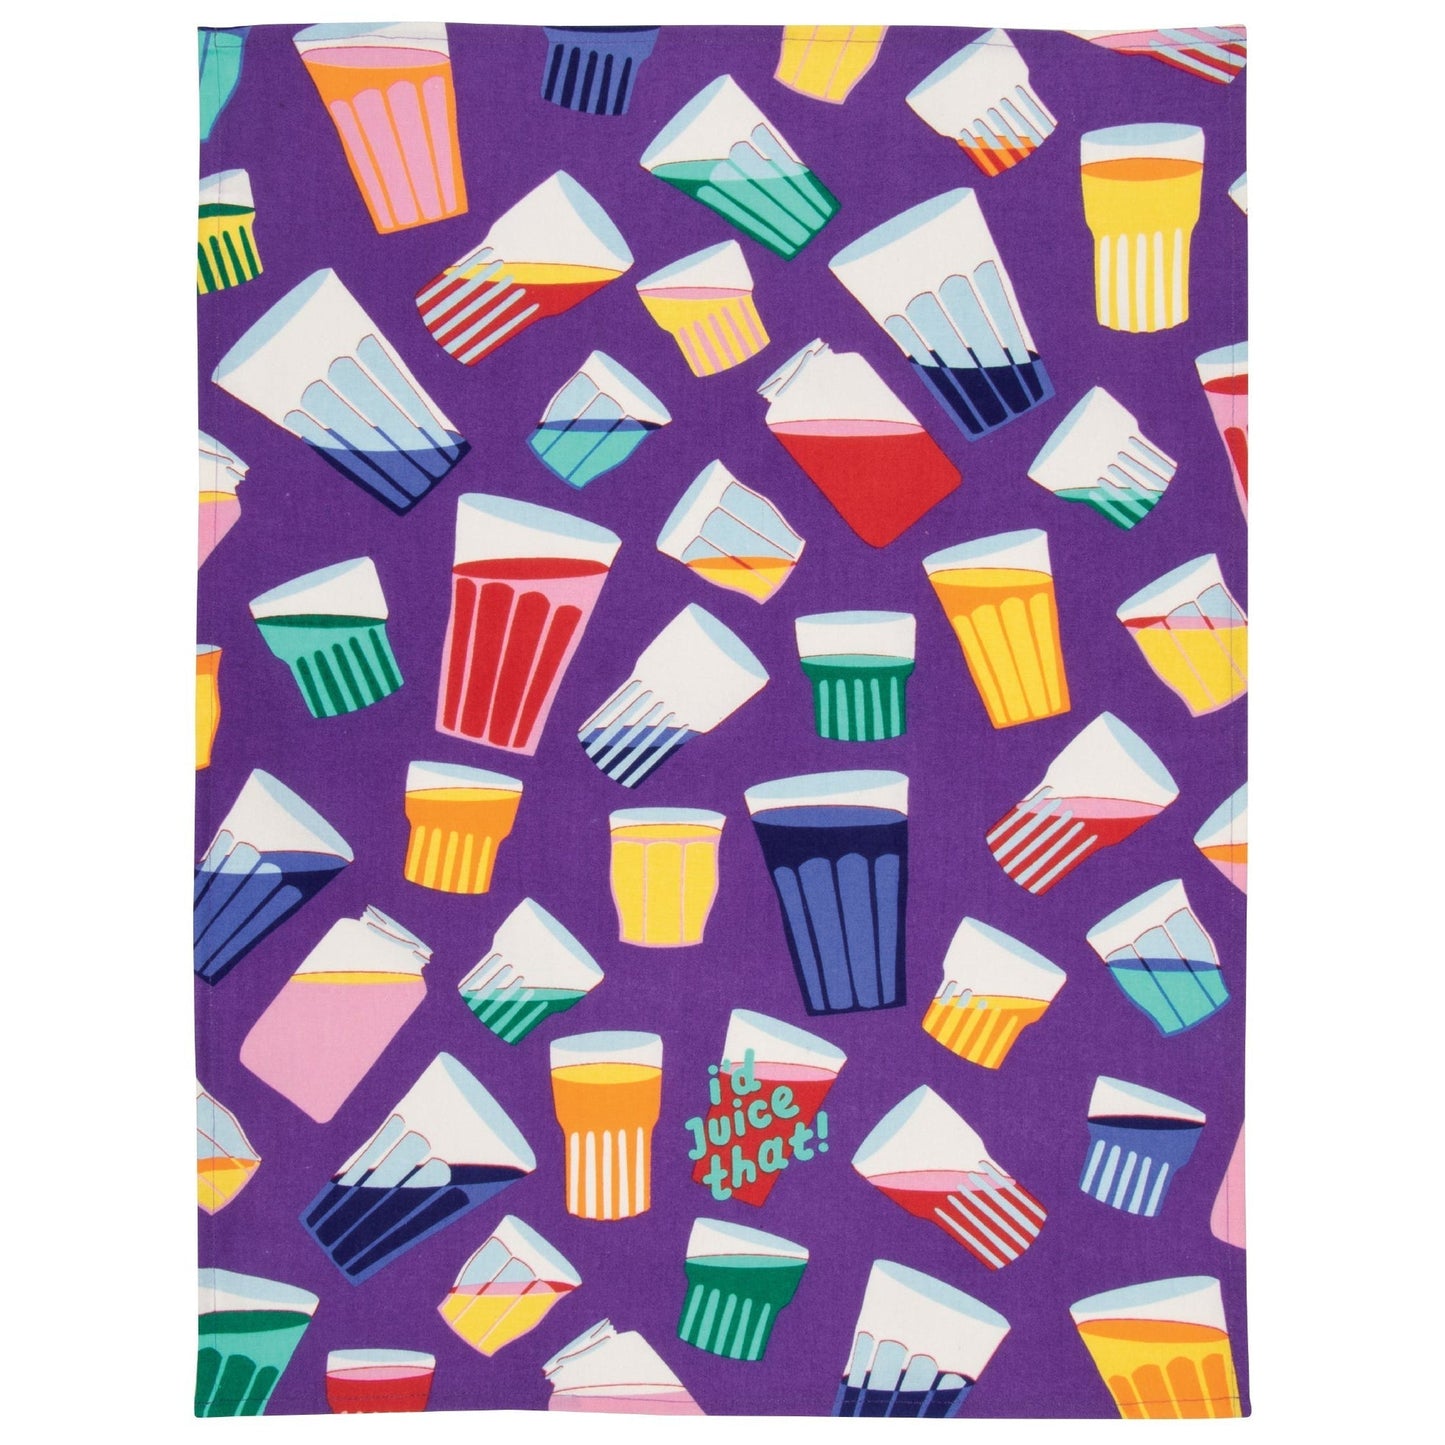 Last Call! I'd Juice That Screen-Printed Dish Towel with Multicolored Glasses Pattern